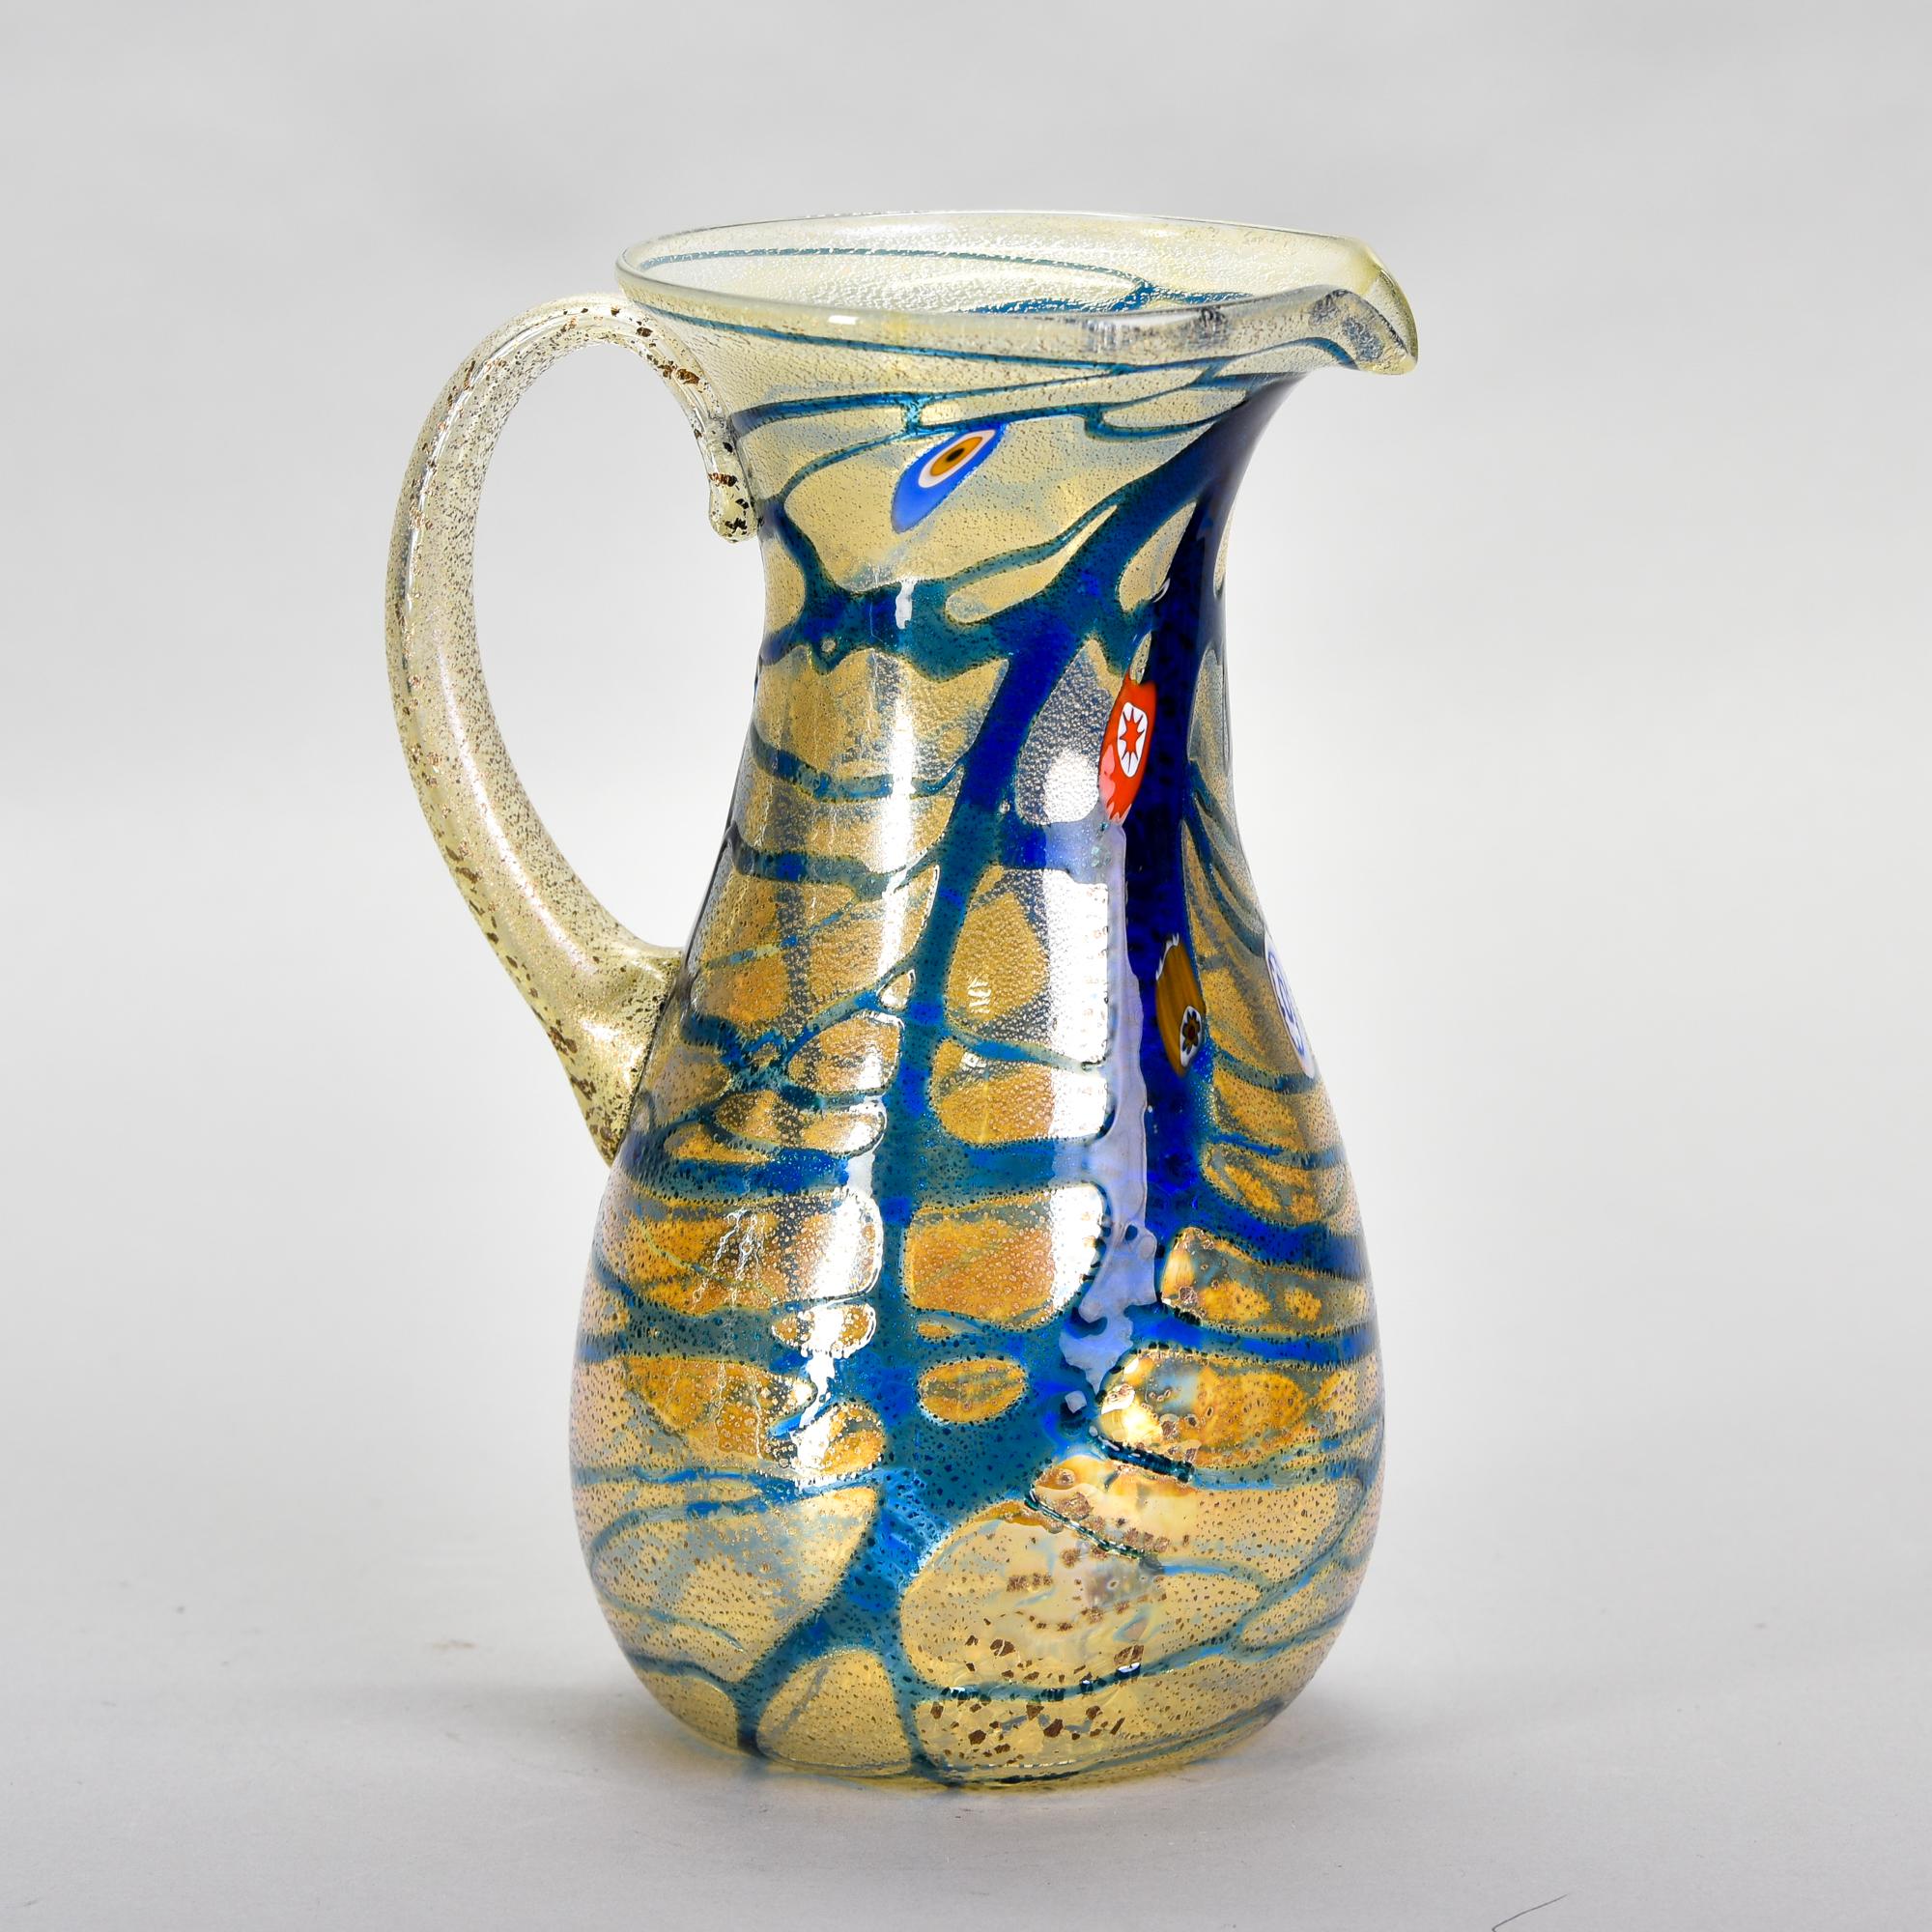 Found in Italy, this new Murano glass pitcher has an iridescent pale gold body with streaks of blue and some scattered murrine flowers. Unknown maker. Versatile, decorative vessel than can be used as a vase or as intended. Unknown Murano maker.